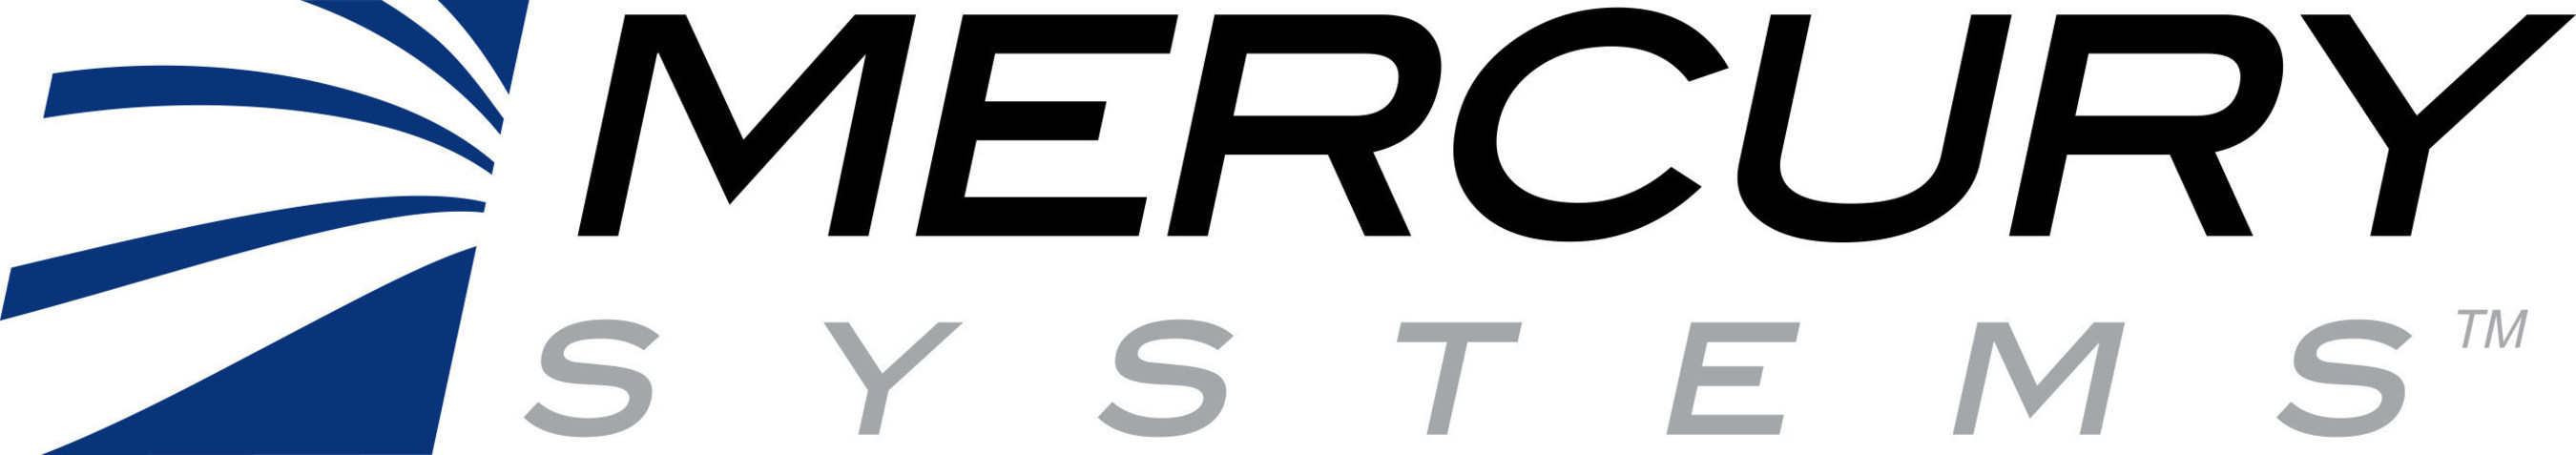 Microsemi Corporation and Mercury Systems, Inc. announced the scheduled closing for Microsemi's sale of its embedded security, RF and microwave, and custom microelectronics businesses to Mercury Systems